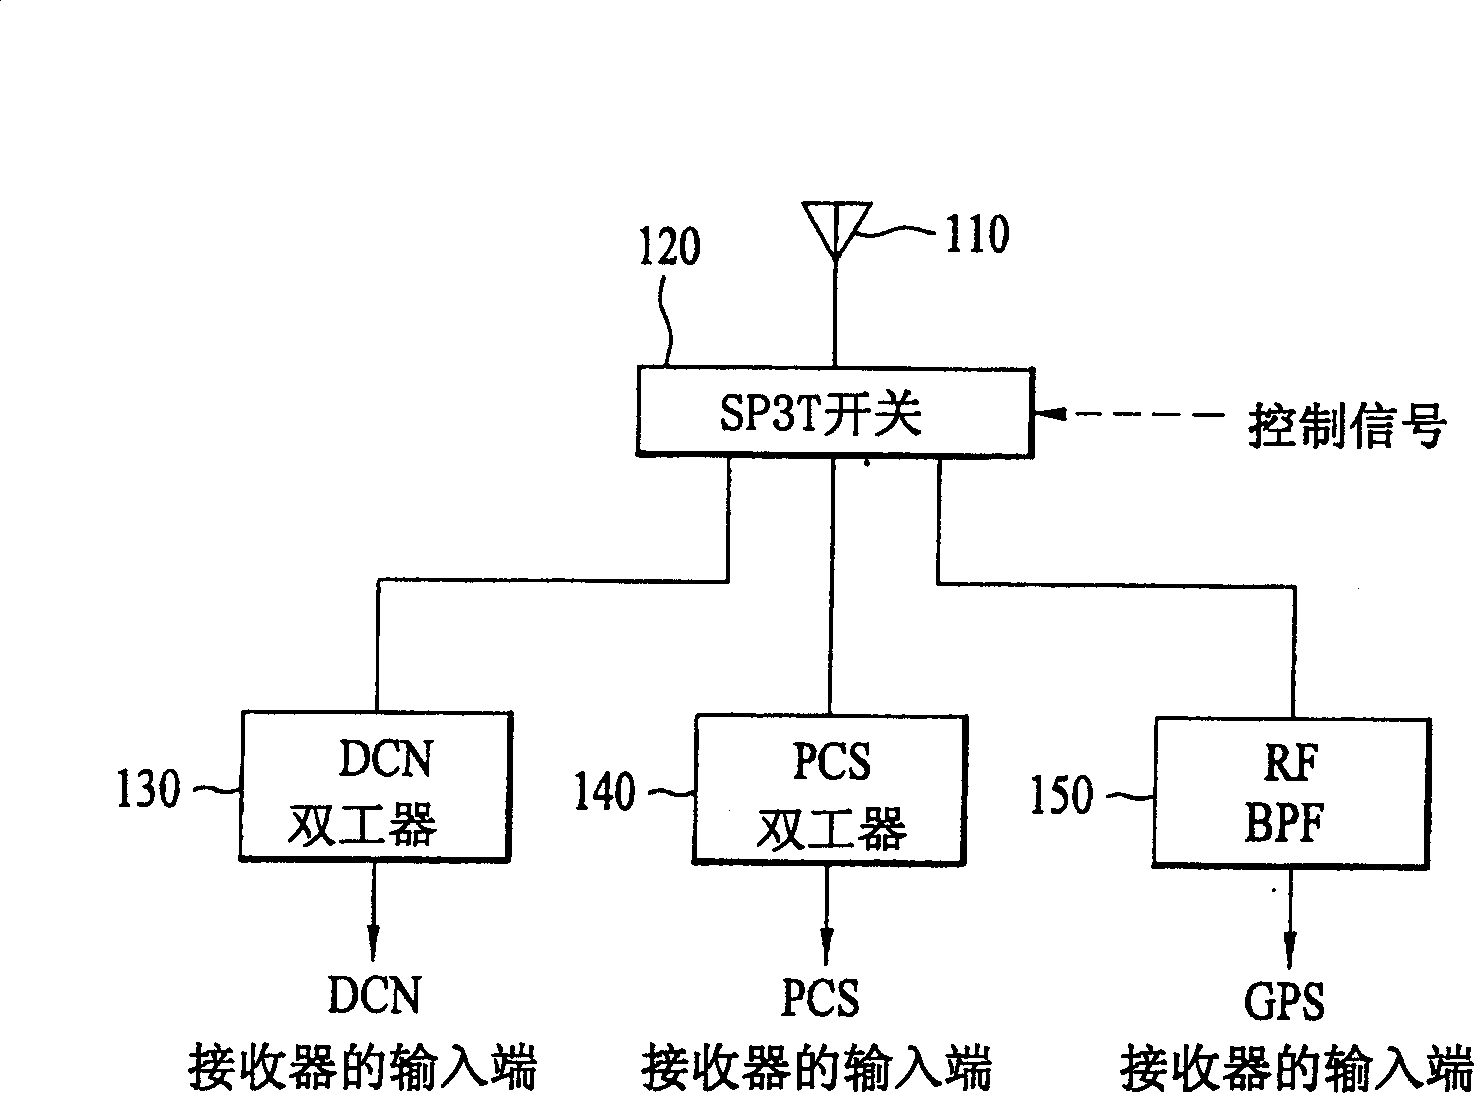 Equipment and method for receiving global position system signal in mobile communication system